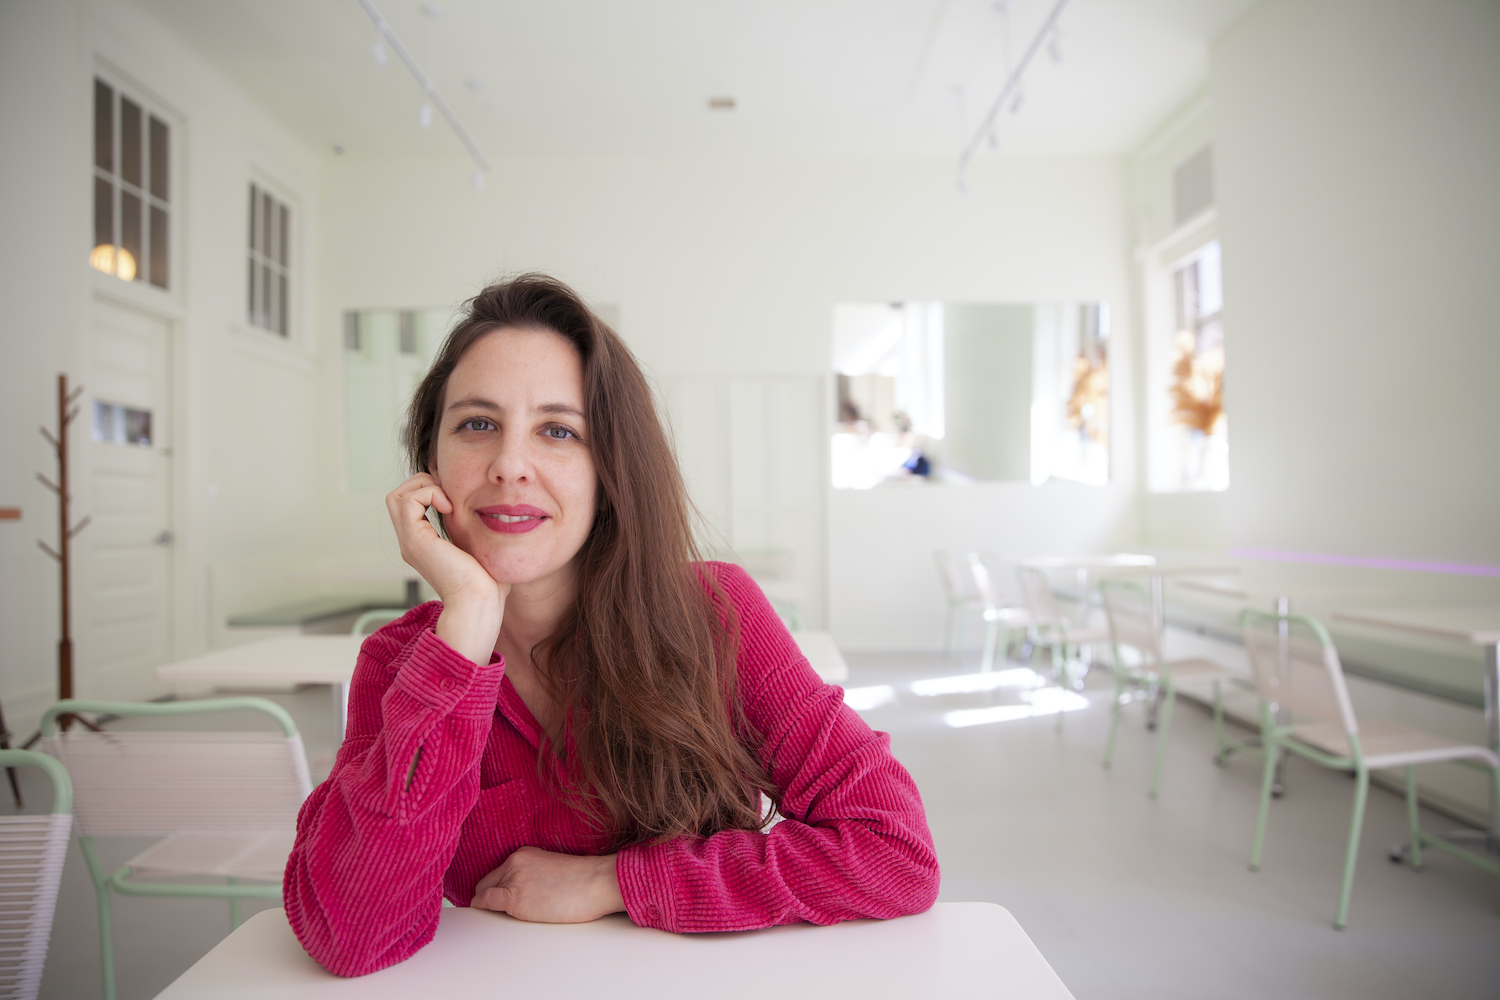 Mina Stone opened her café, Mina’s, on the ground-floor of MoMA PS1 in September 2019.